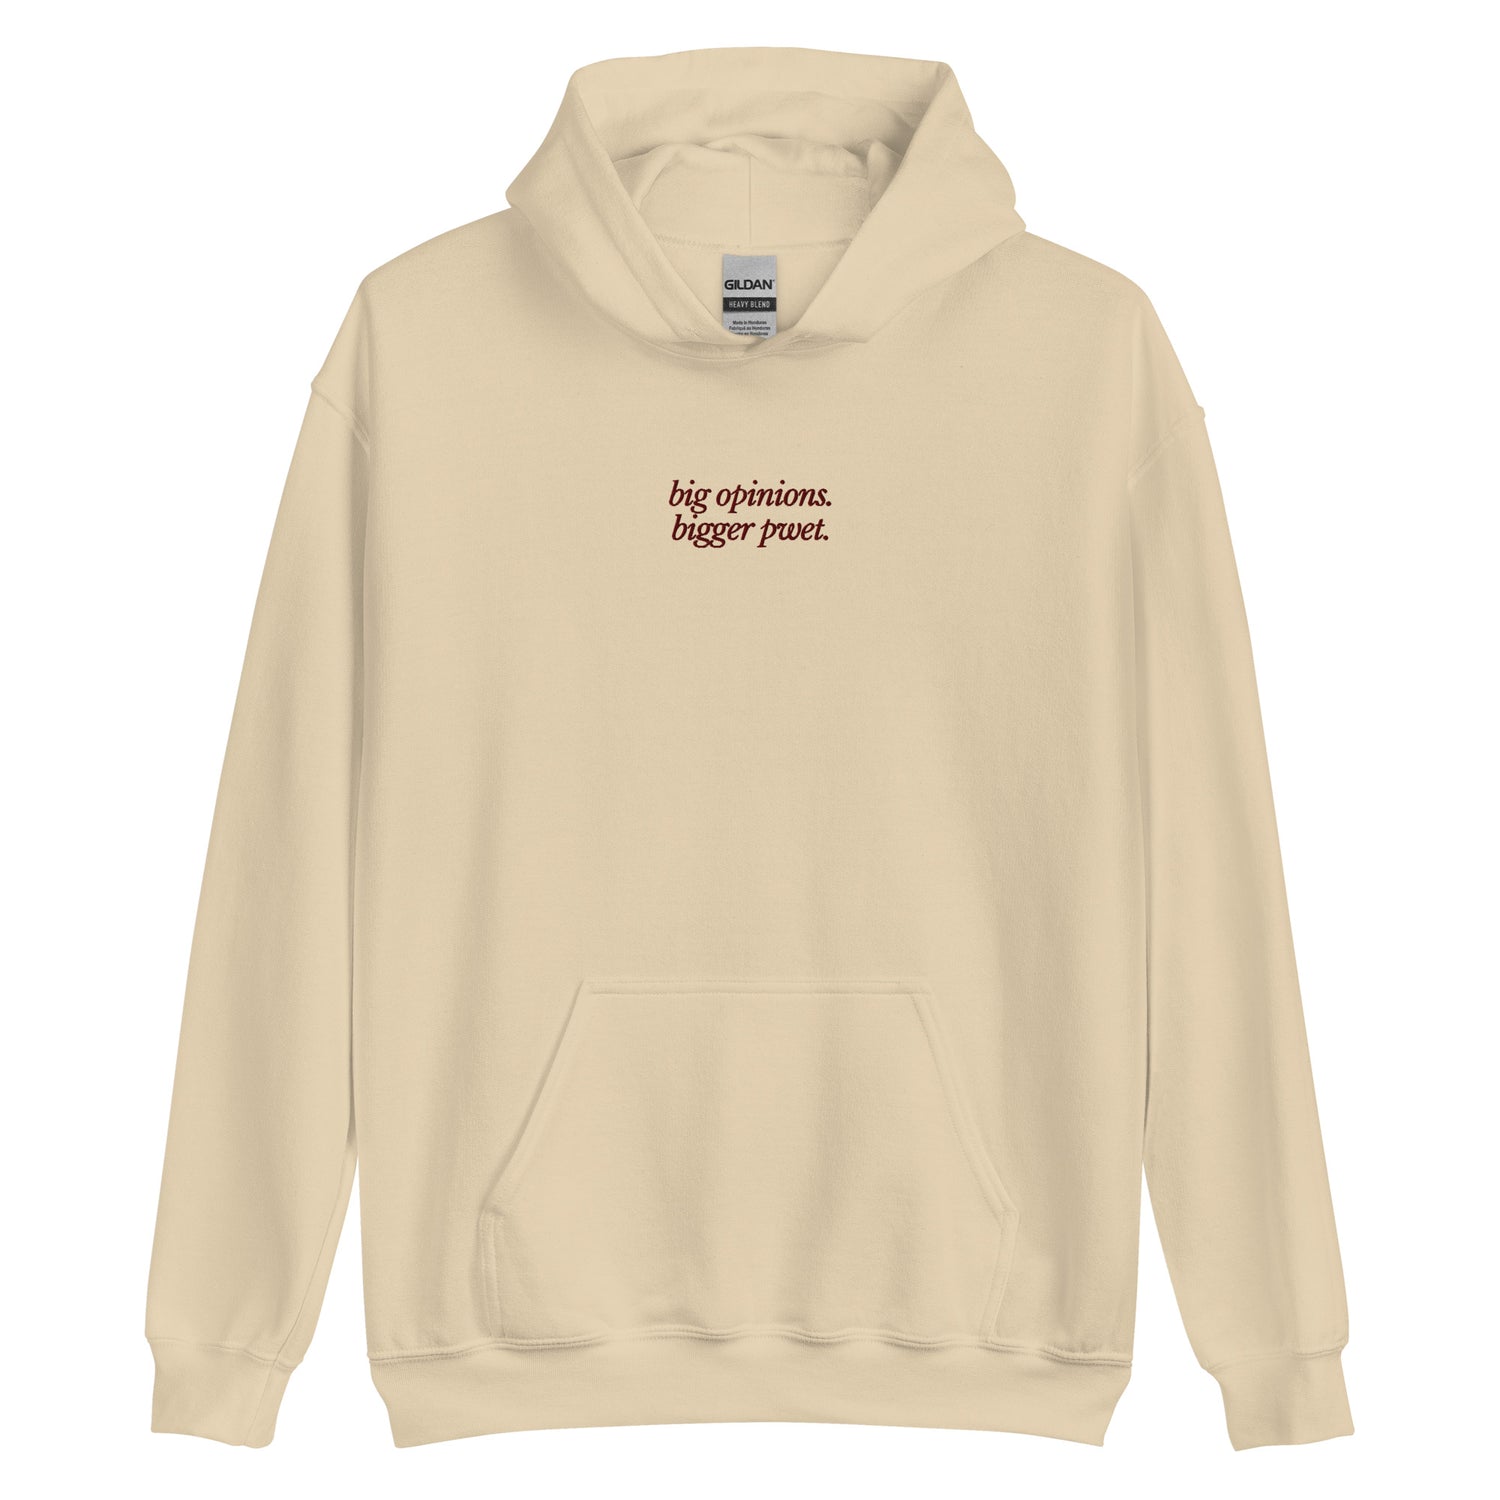 Filipino Hoodie Bigger Pwet Funny Embroidered Merch in Sand